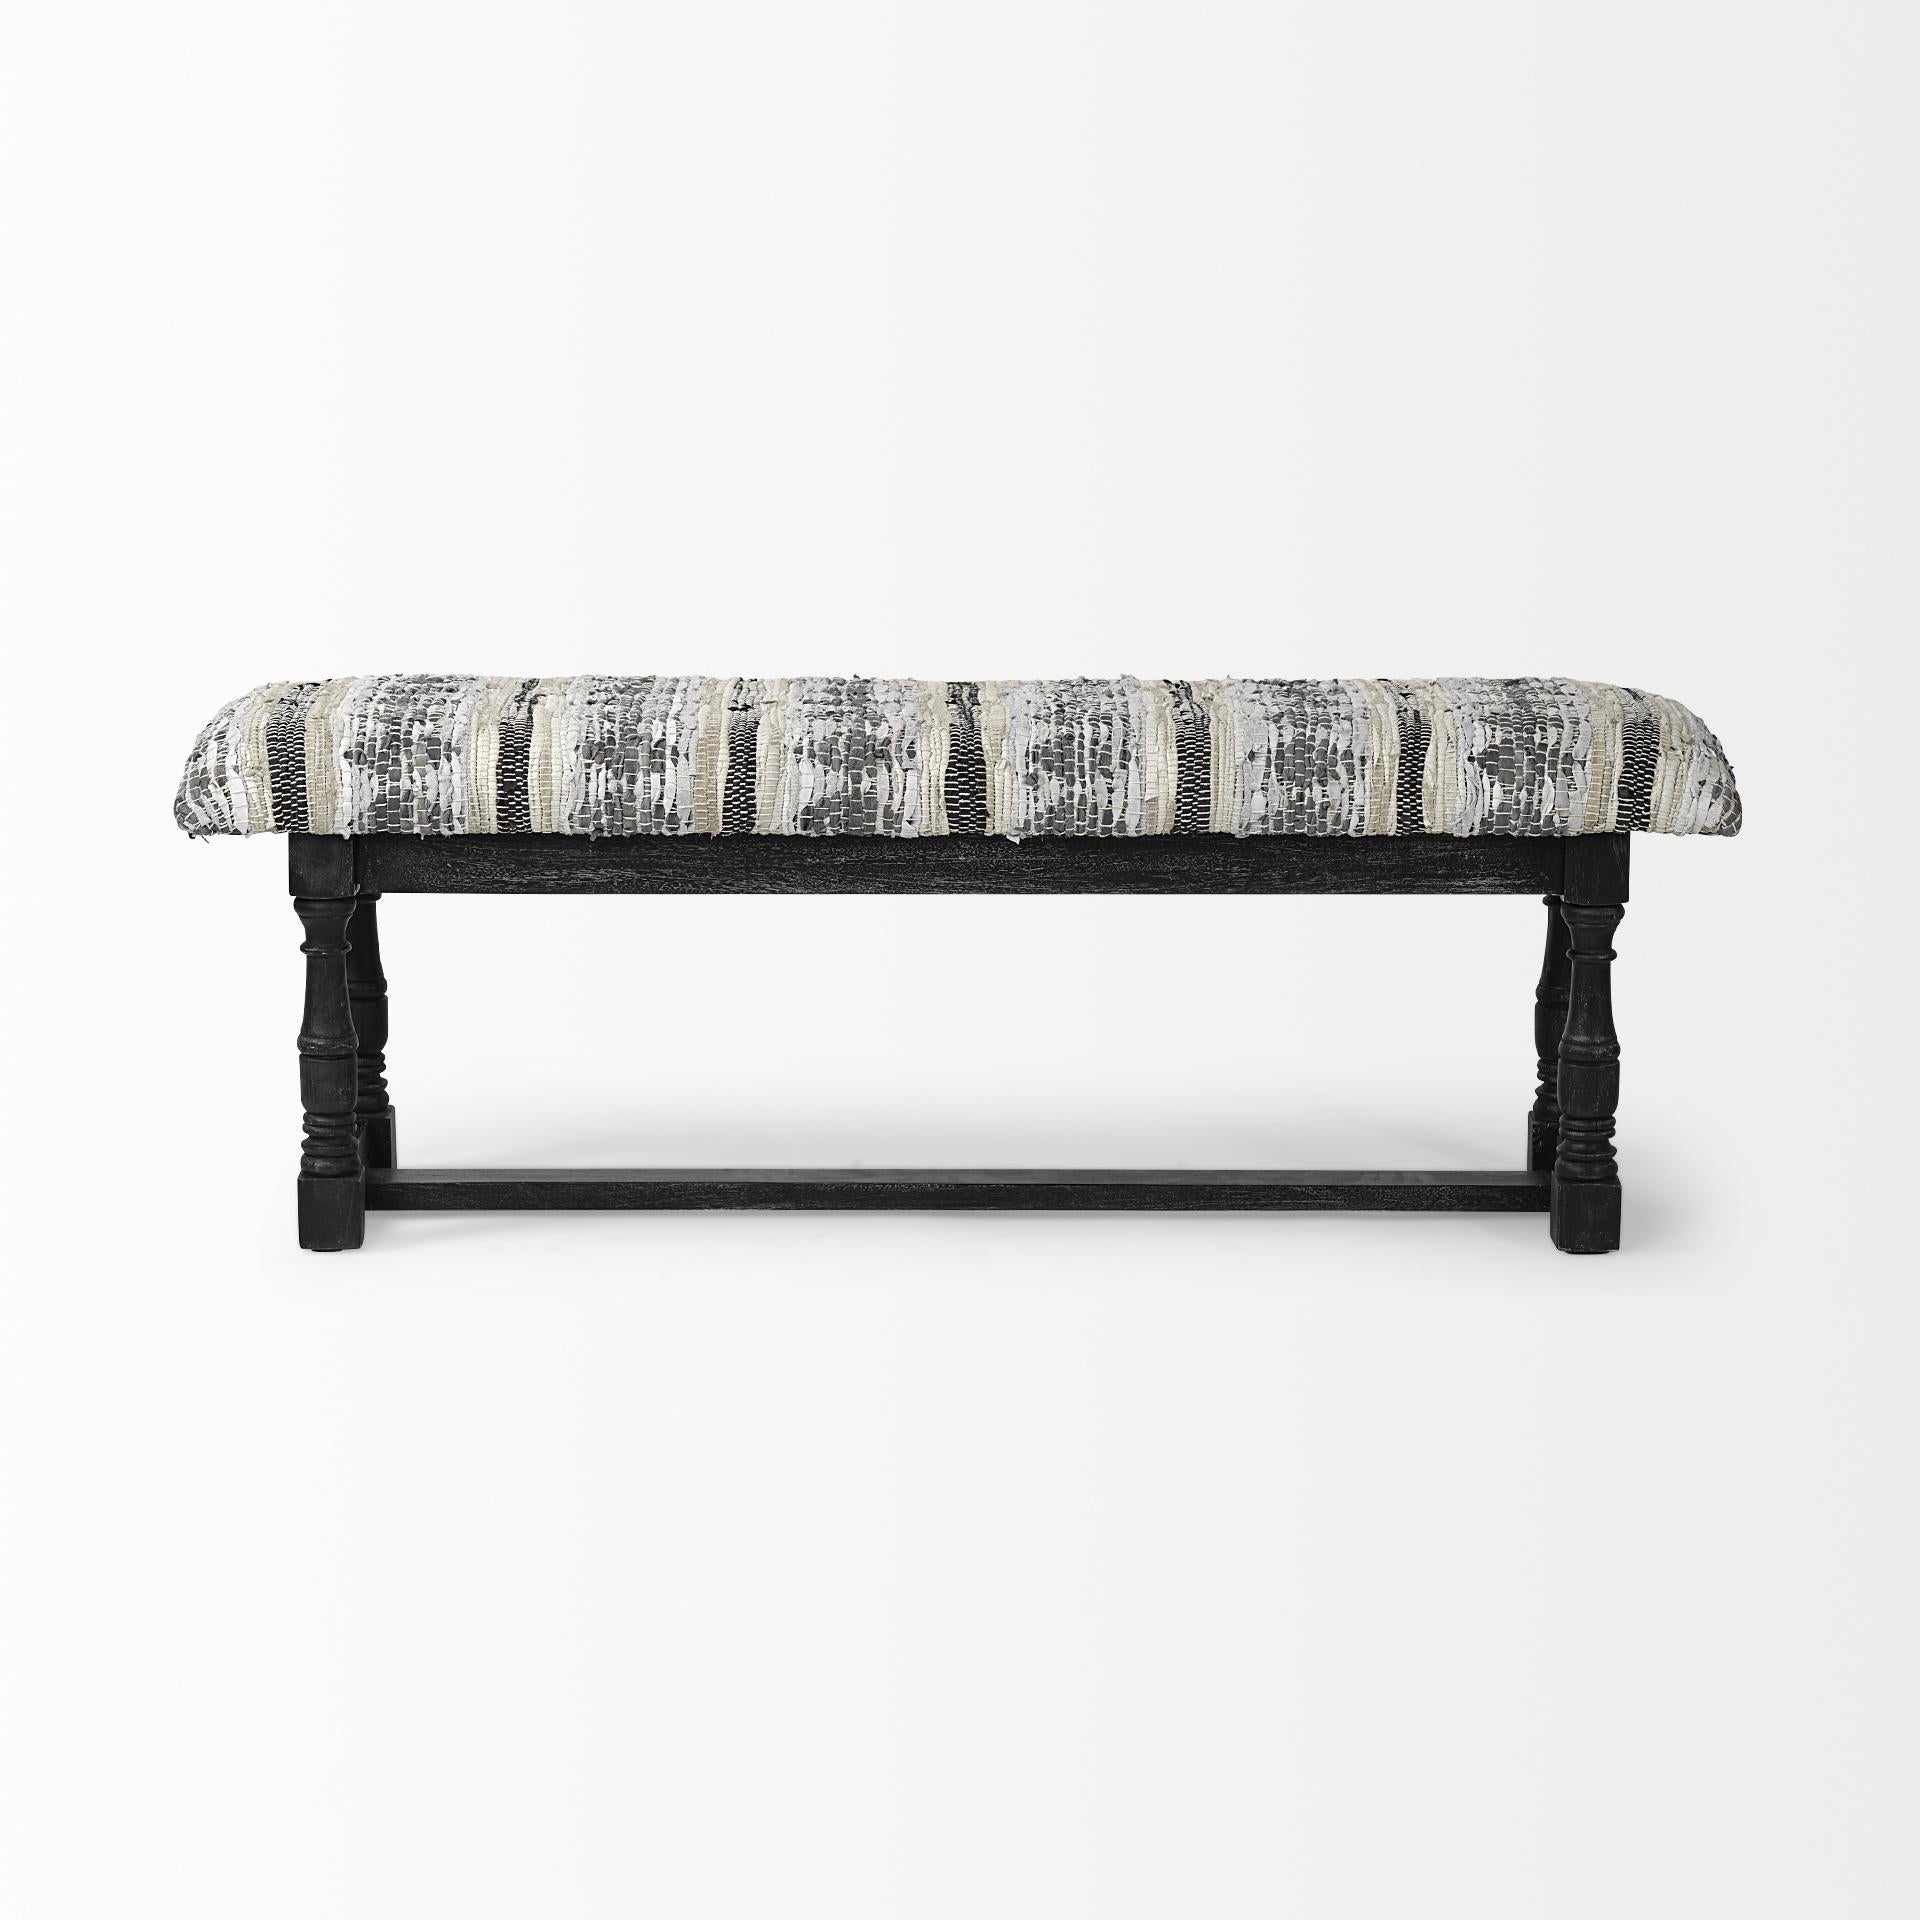 Rectangular Indian Mango WoodBlack W Woven-Leather Cushion Top Accent Bench